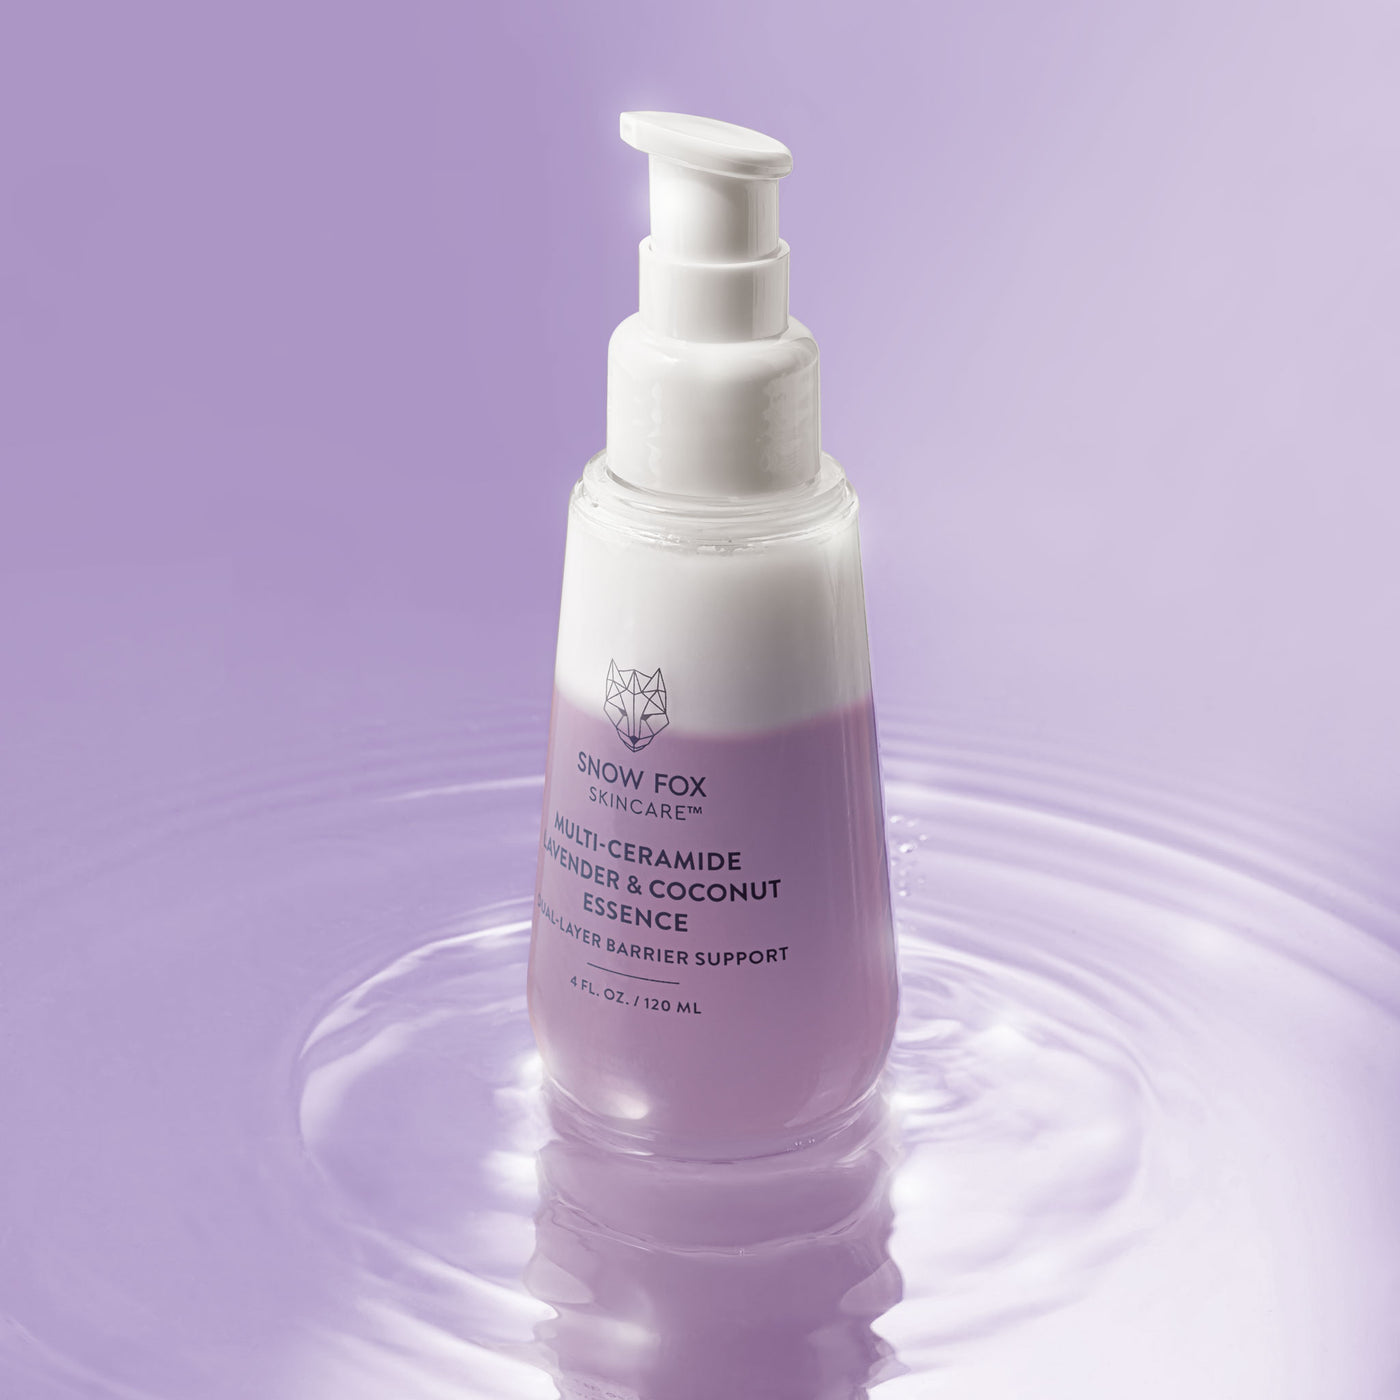 A ceramide-packed milky two-layer essence that hydrates, refreshes and supports the skin's natural moisture barriers. Multi Ceramide Lavender and Coconut Essence. 